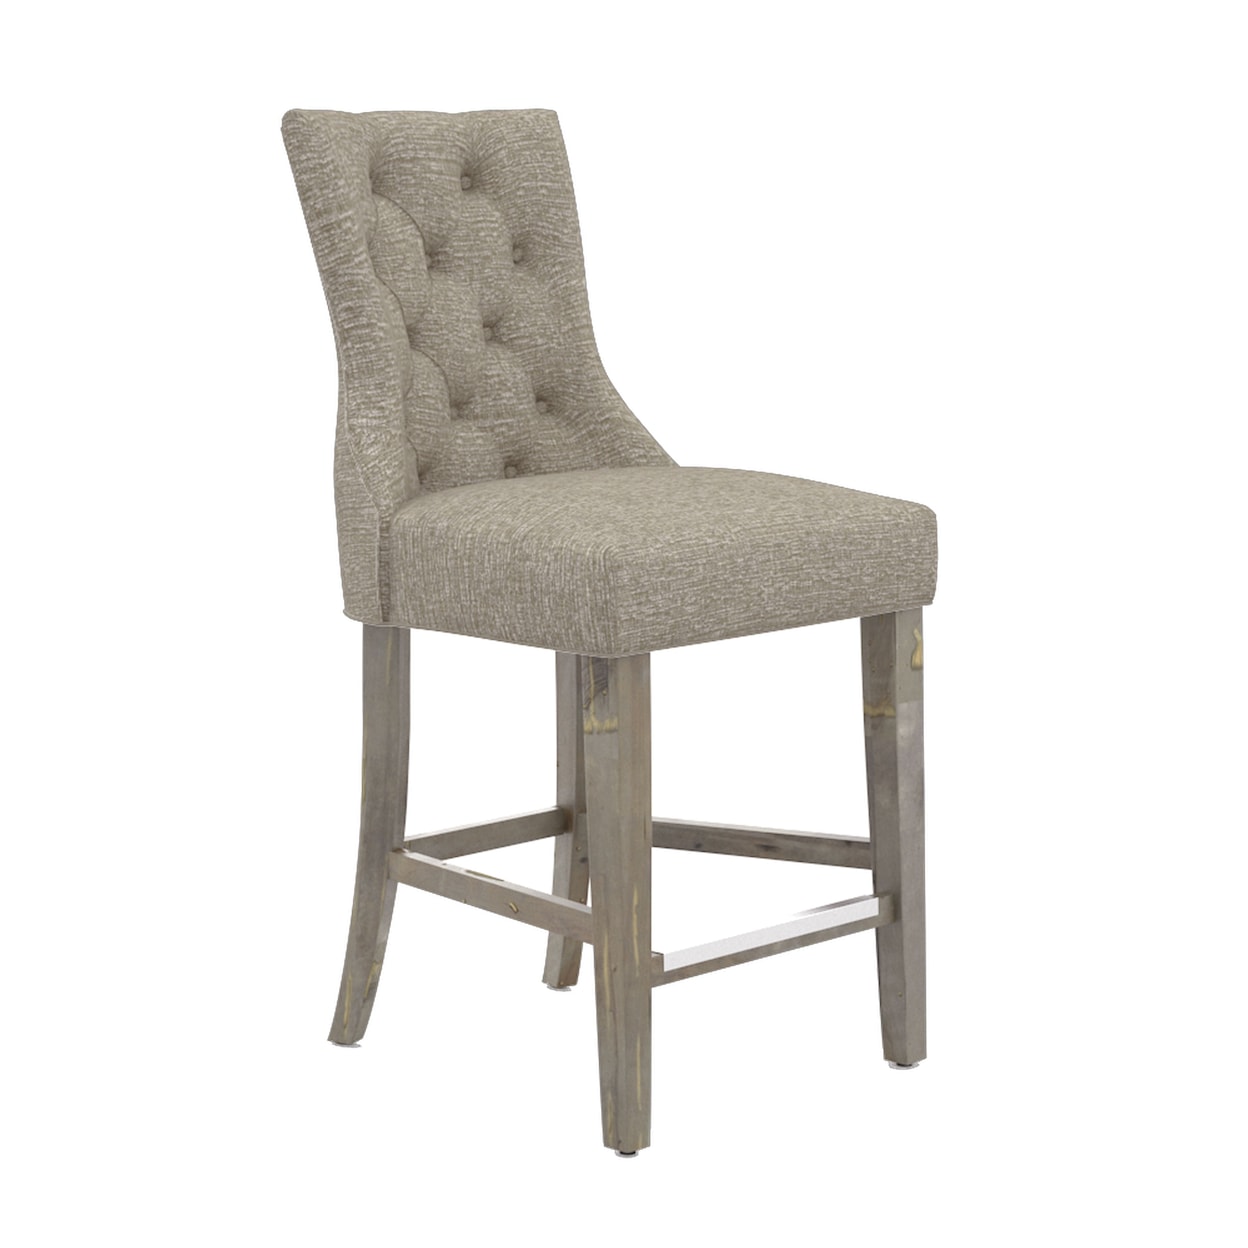 Canadel Champlain Upholstered fixed stool